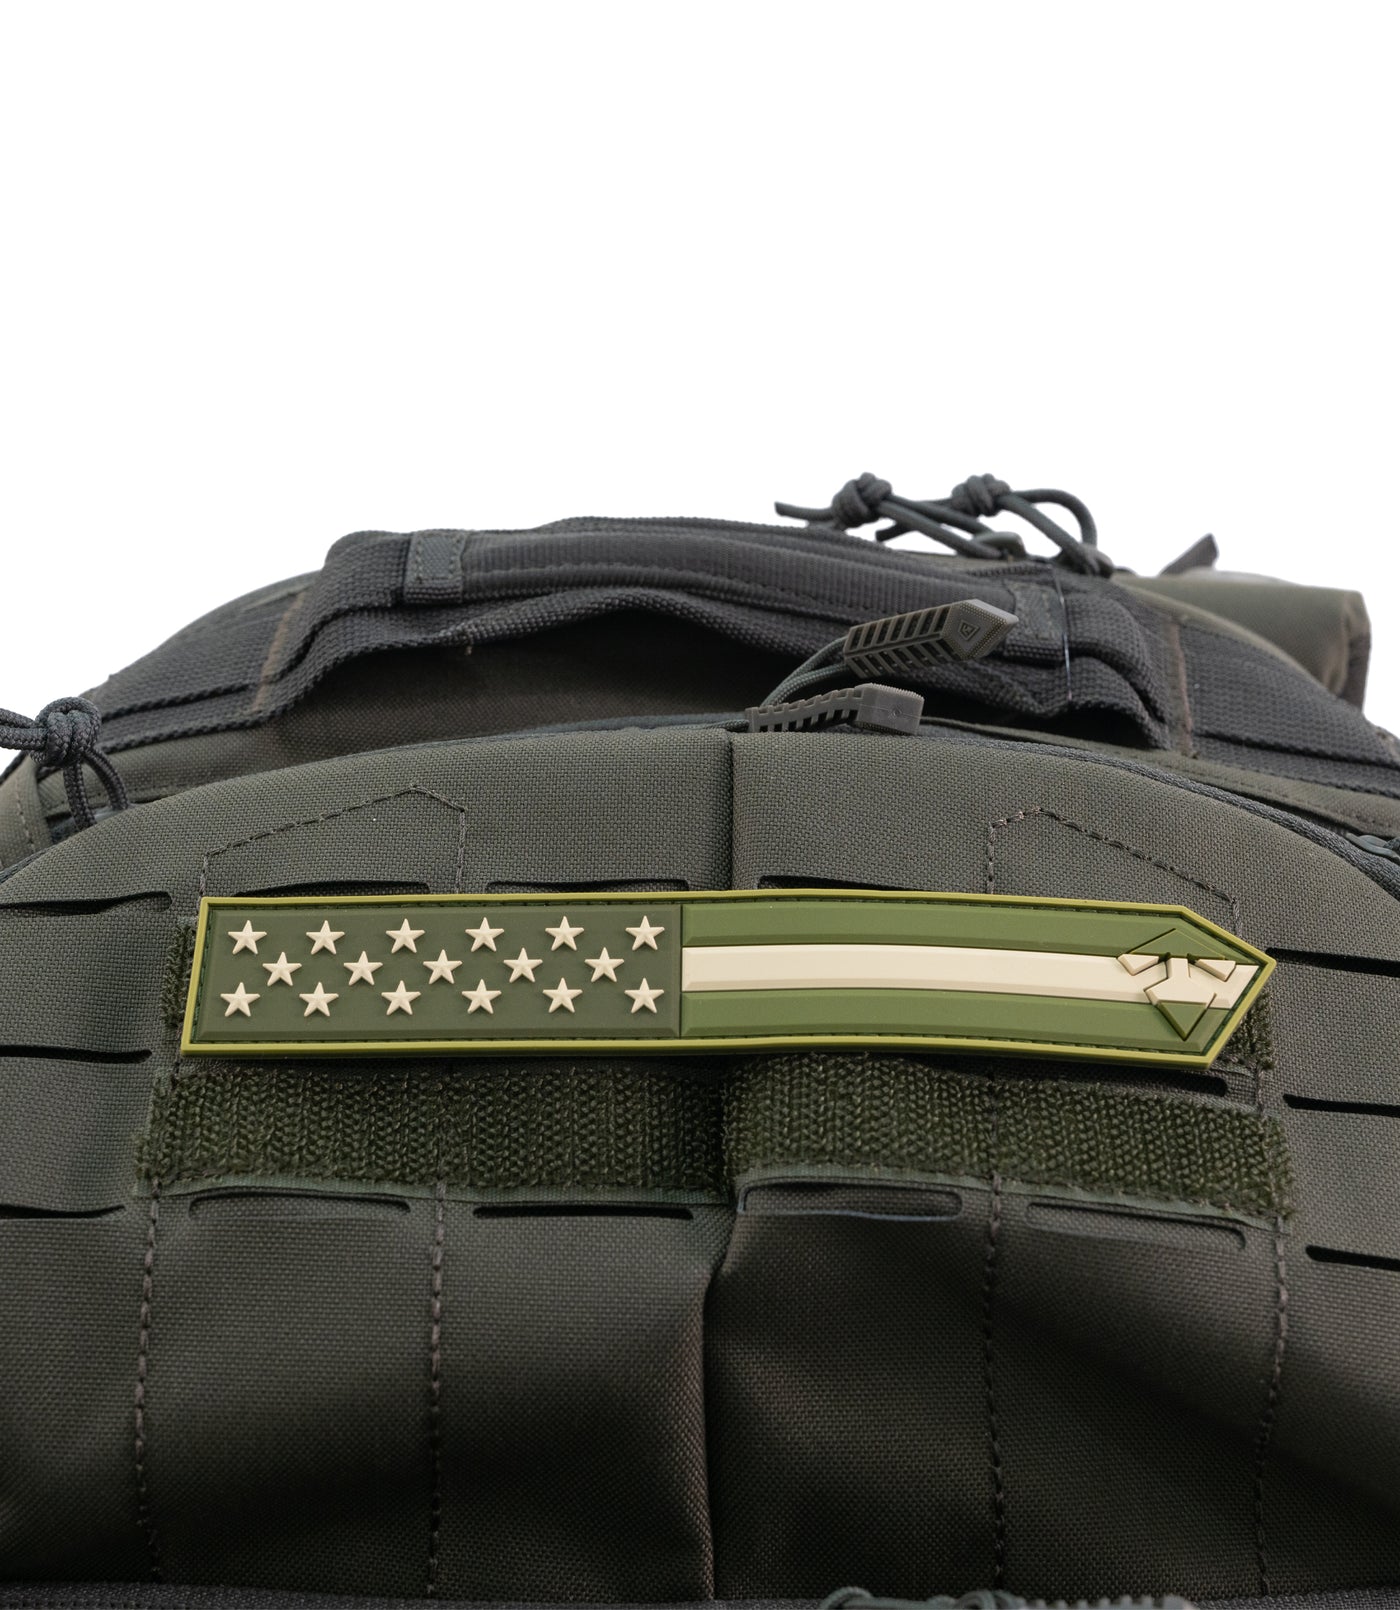 USA Nametape Patch in OD Green on Bag